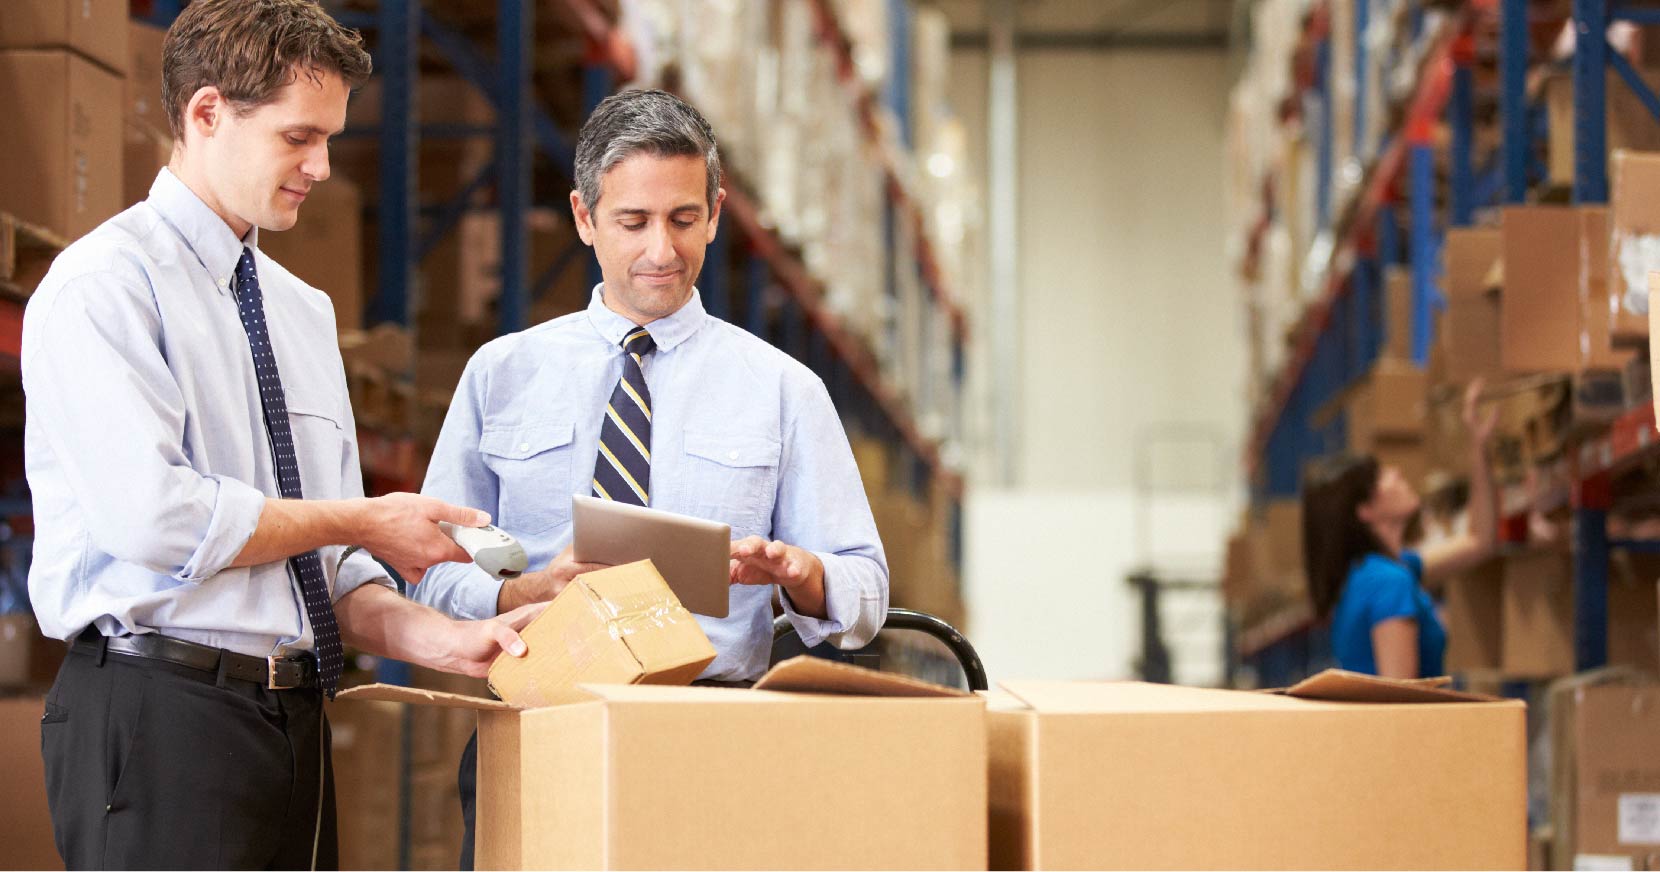 What do you do when your Warehouse Management efforts fail to provide you with needed Inventory?